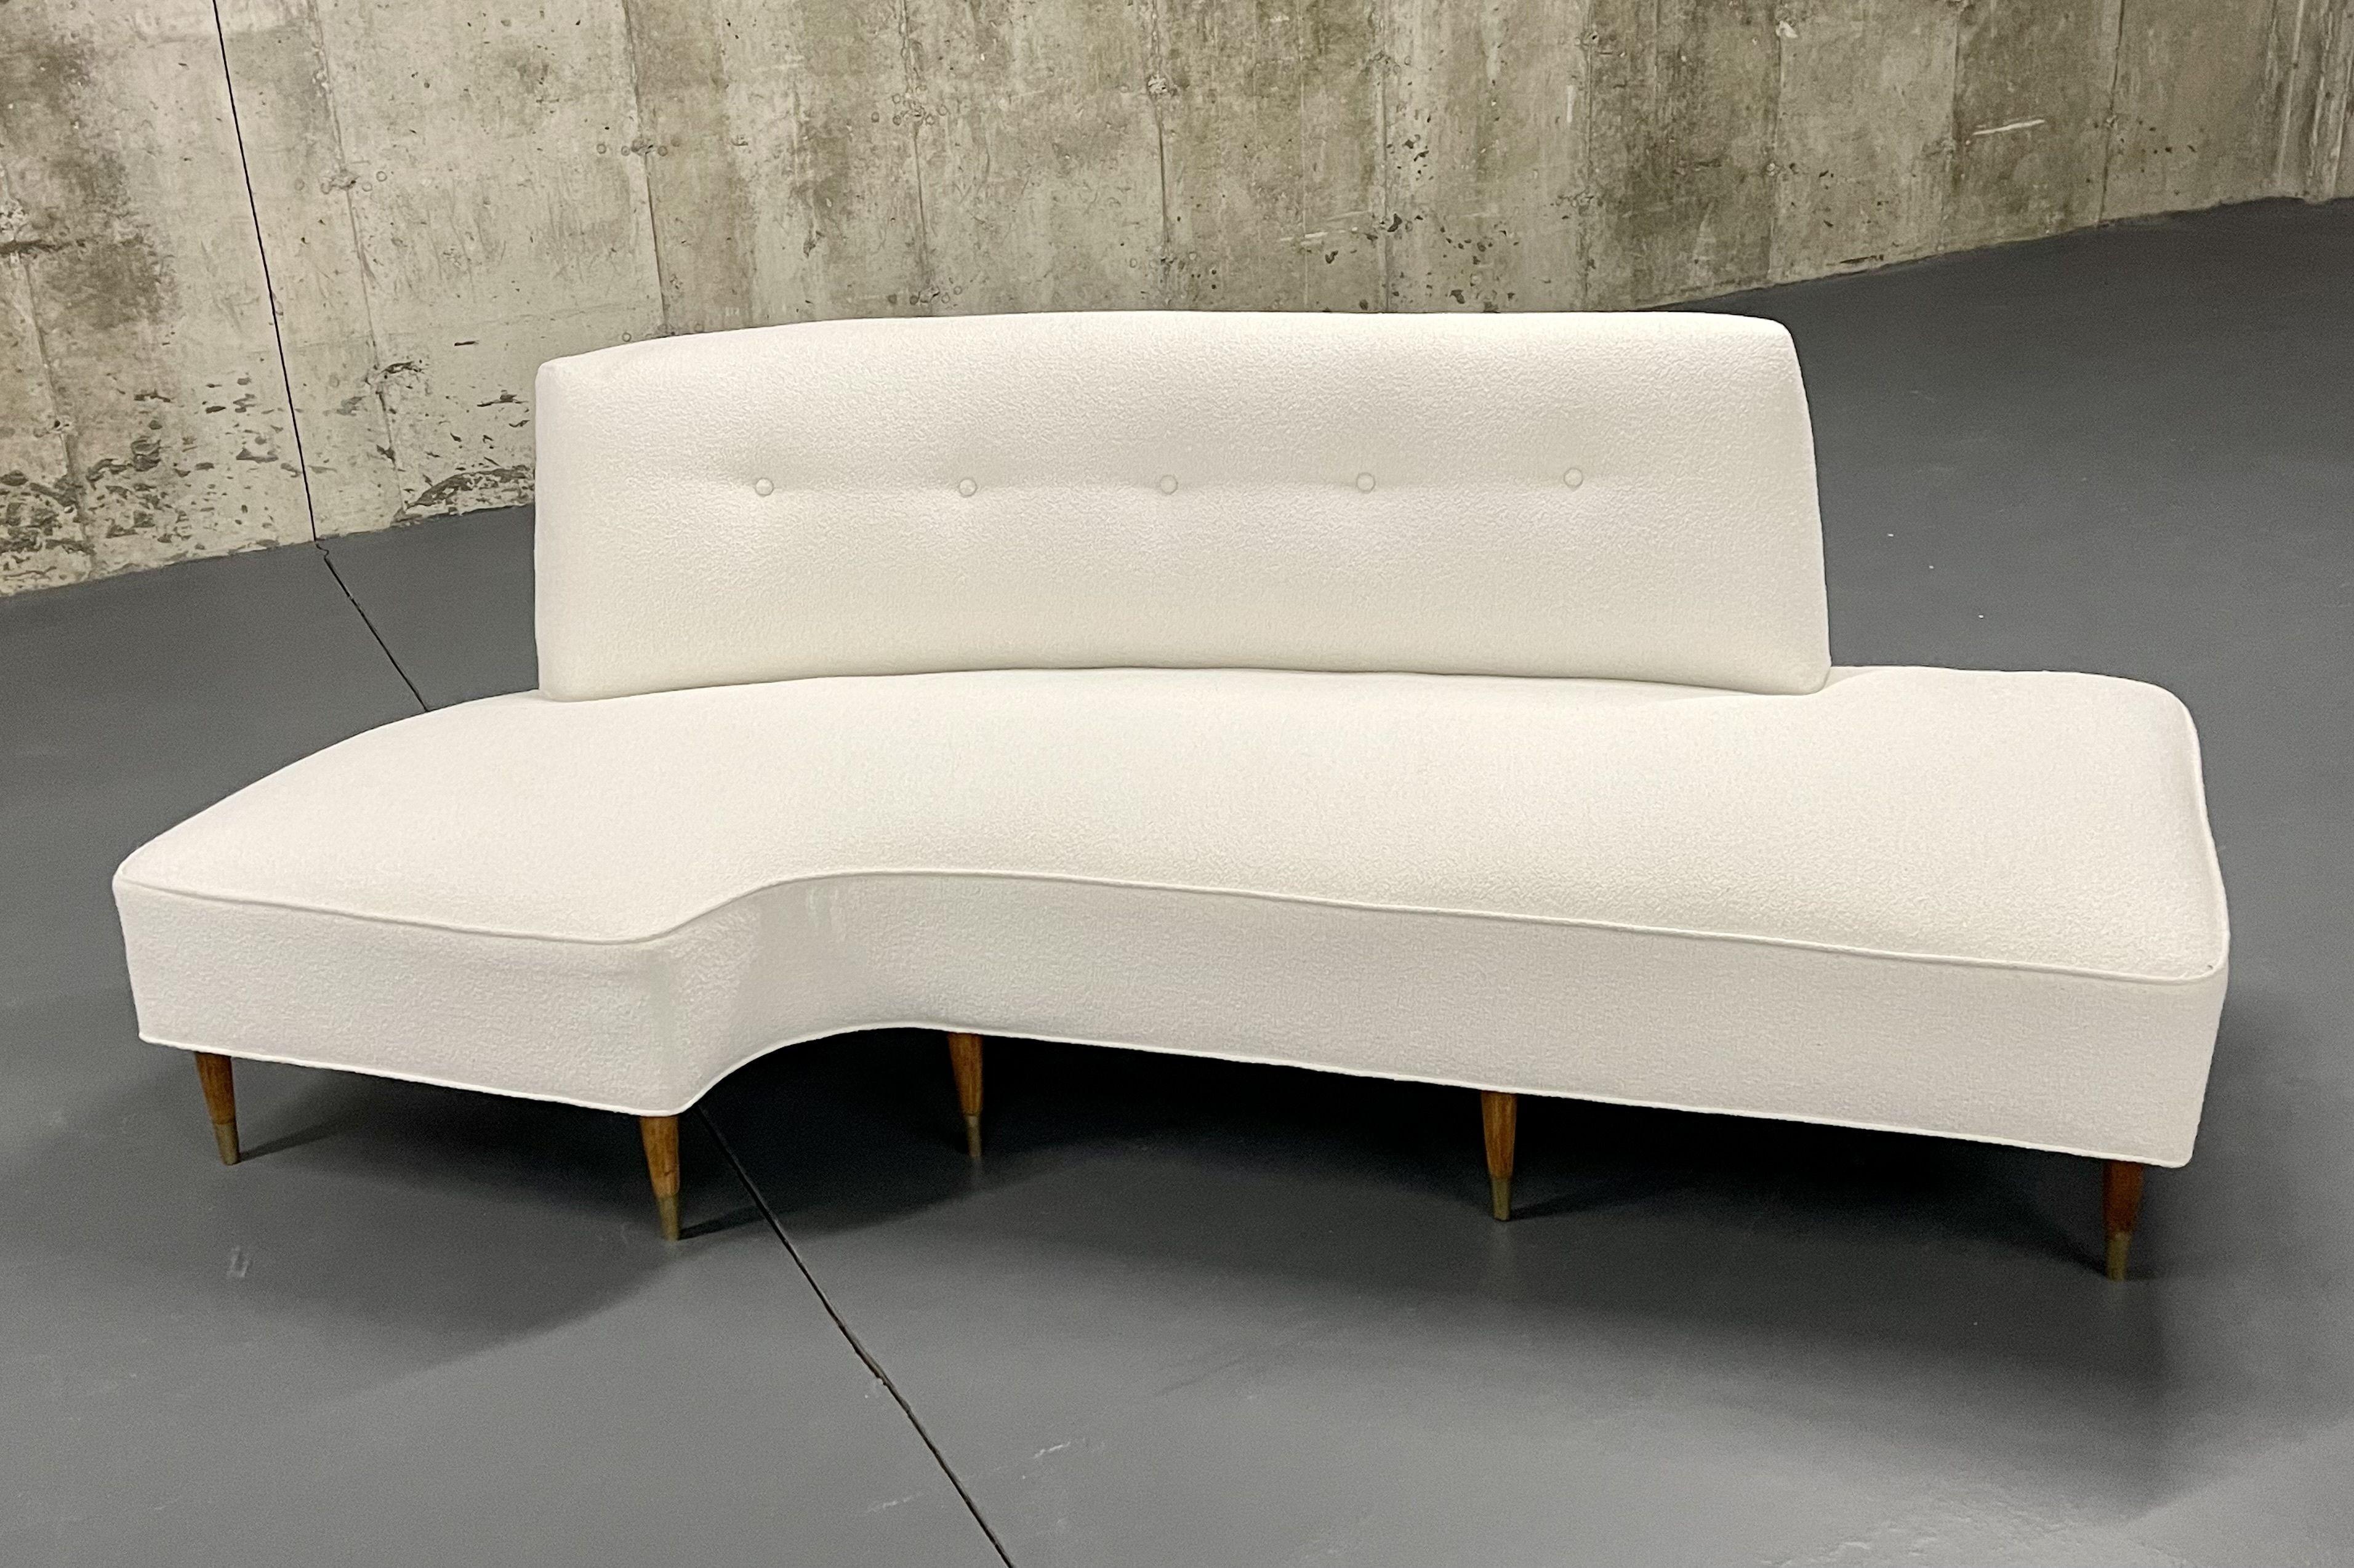 Mid-Century Modern Italian designer corner/curved sofa, chaise lounge, bouclé.

Curved freeform, organic shape sofa, settee, loveseat or chaise lounge having a newly upholstered white Bouclé upper sitting on walnut legs with brass